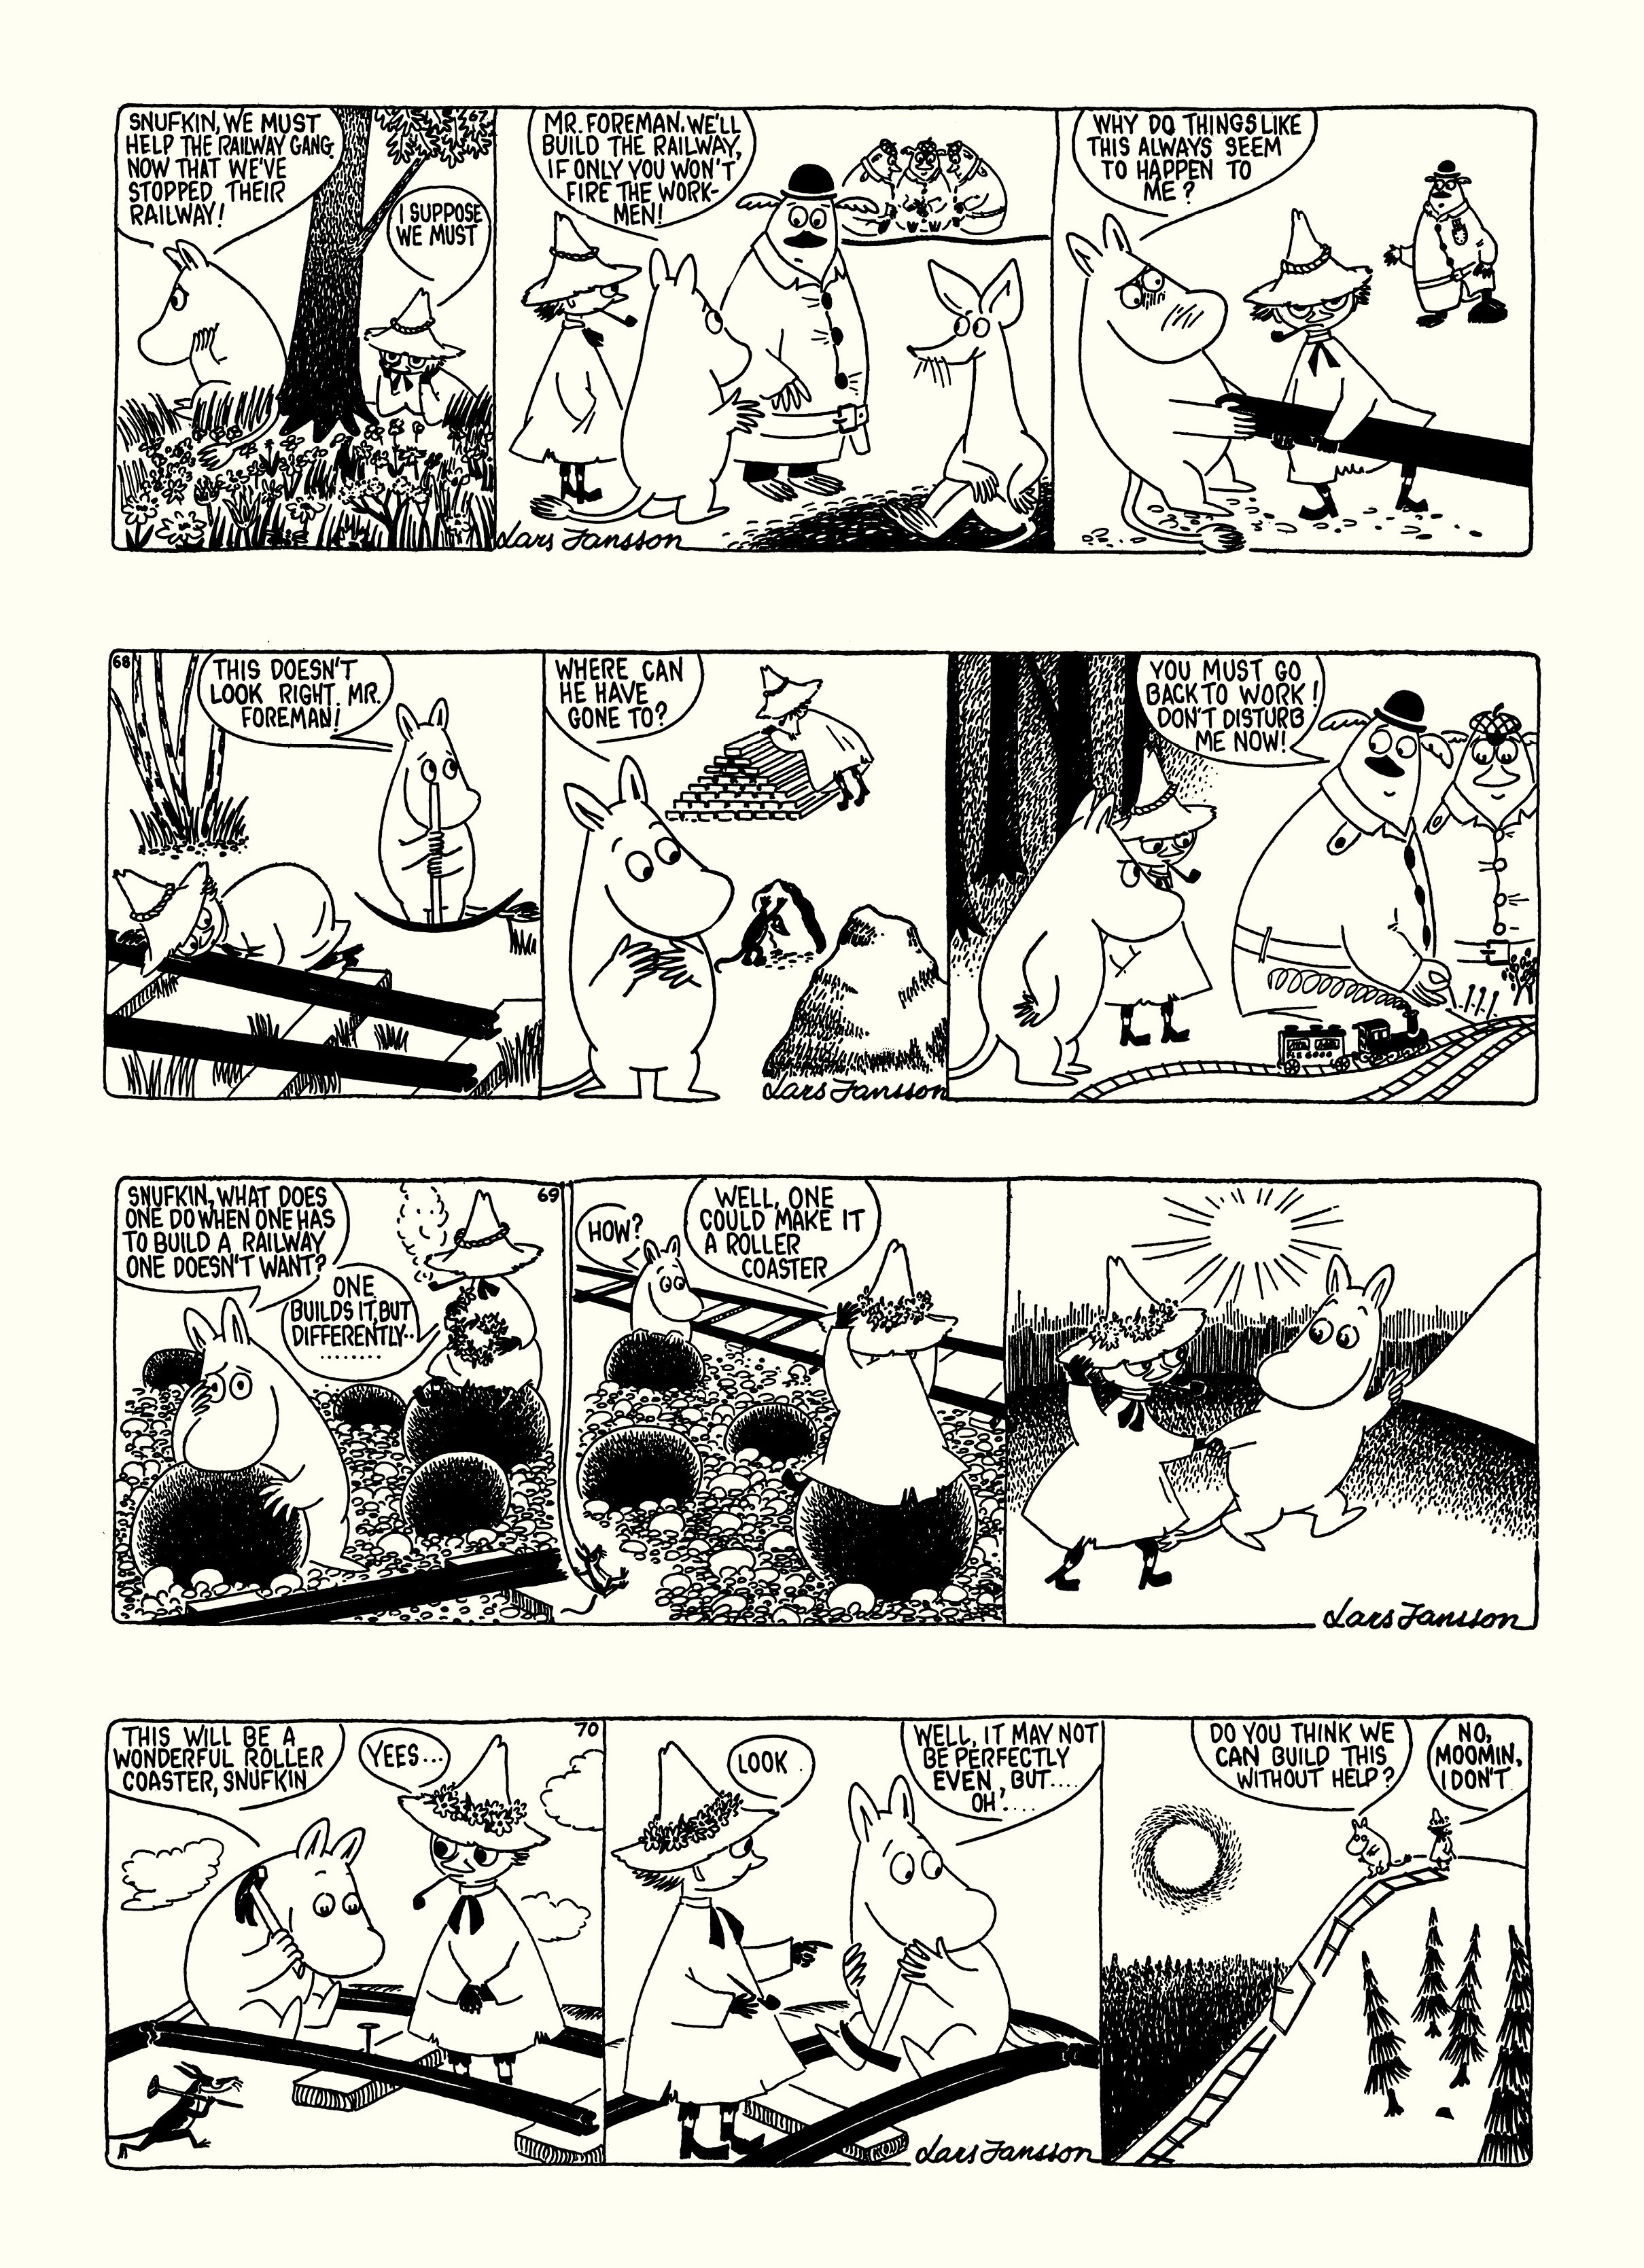 Read online Moomin: The Complete Lars Jansson Comic Strip comic -  Issue # TPB 6 - 43